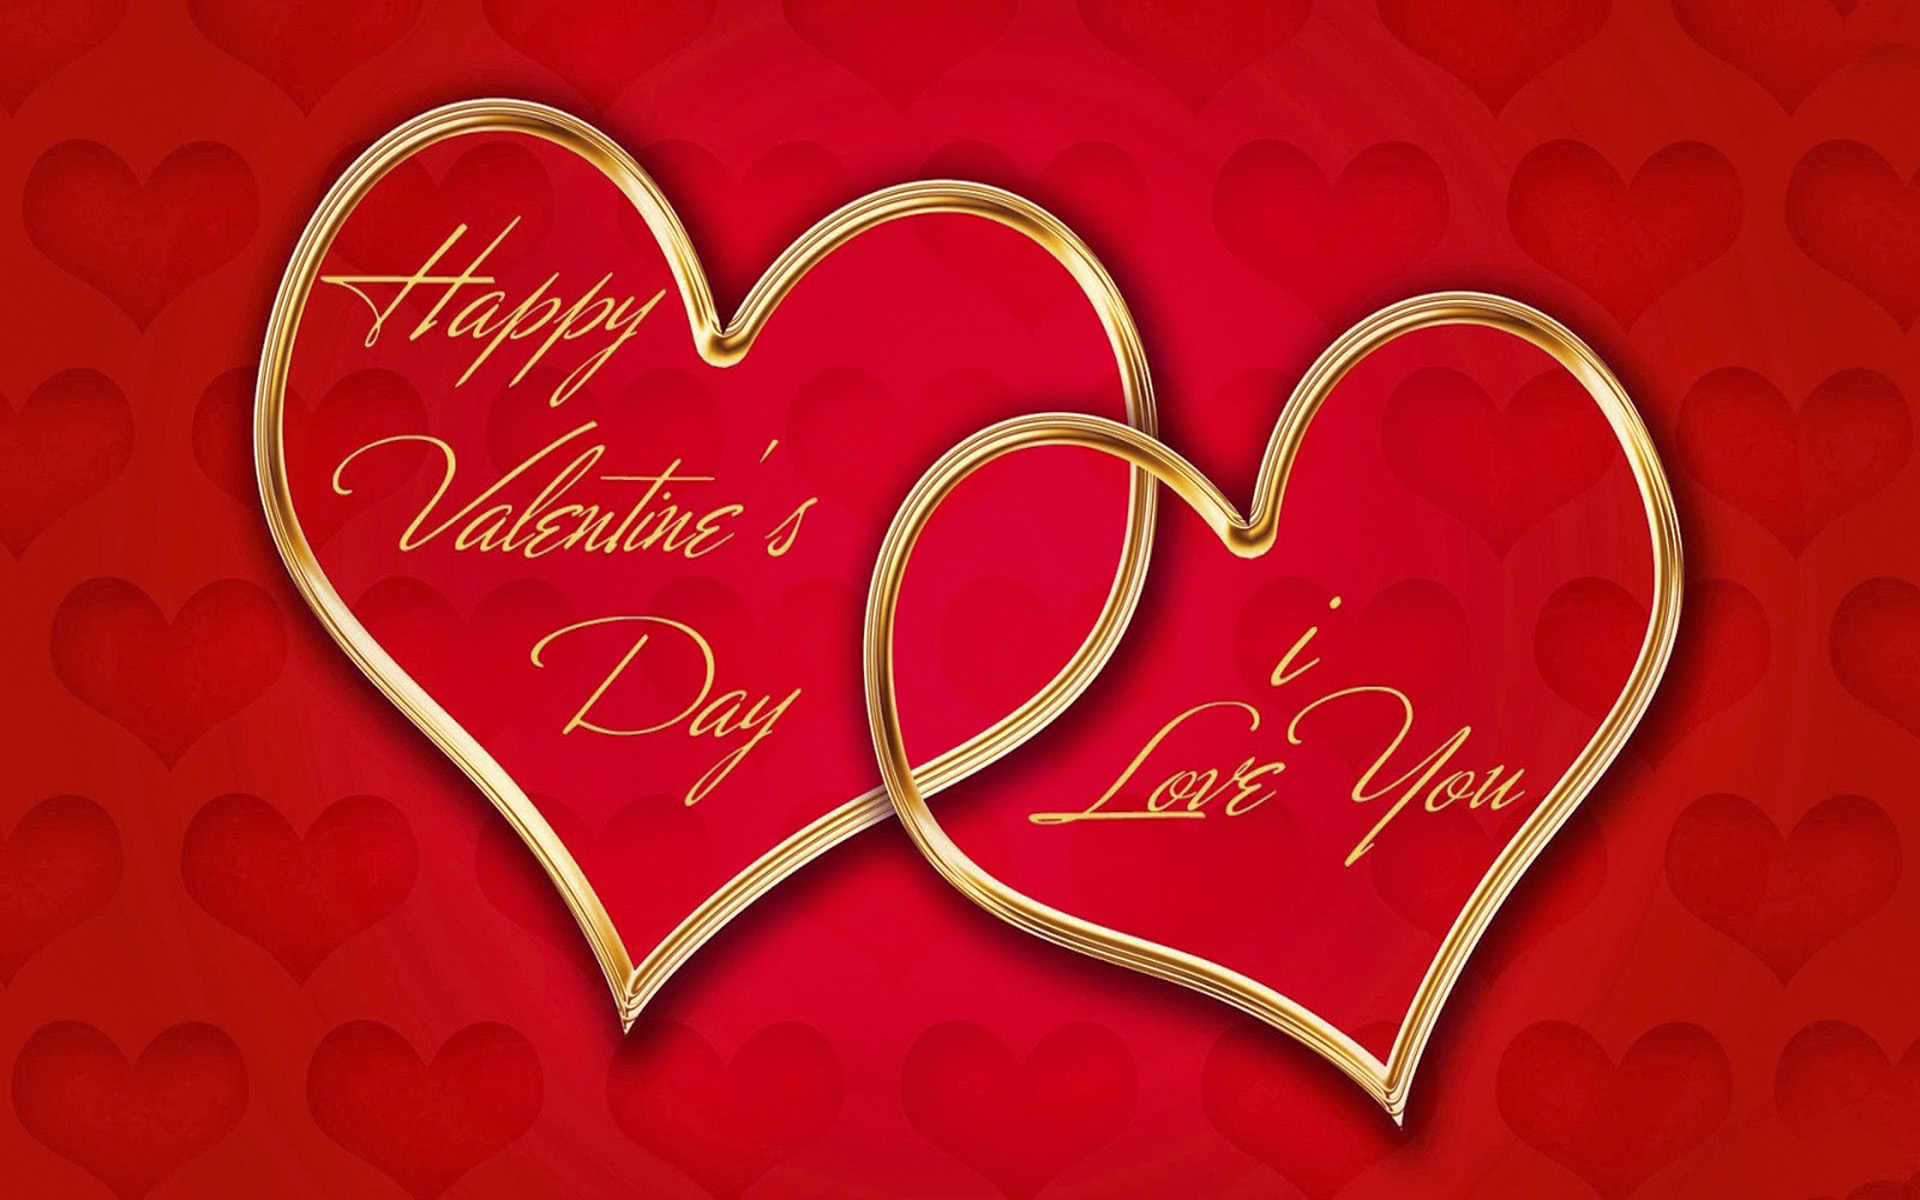 Red Happy Valentines Day I Love You Wallpaper Wallpapers13com.